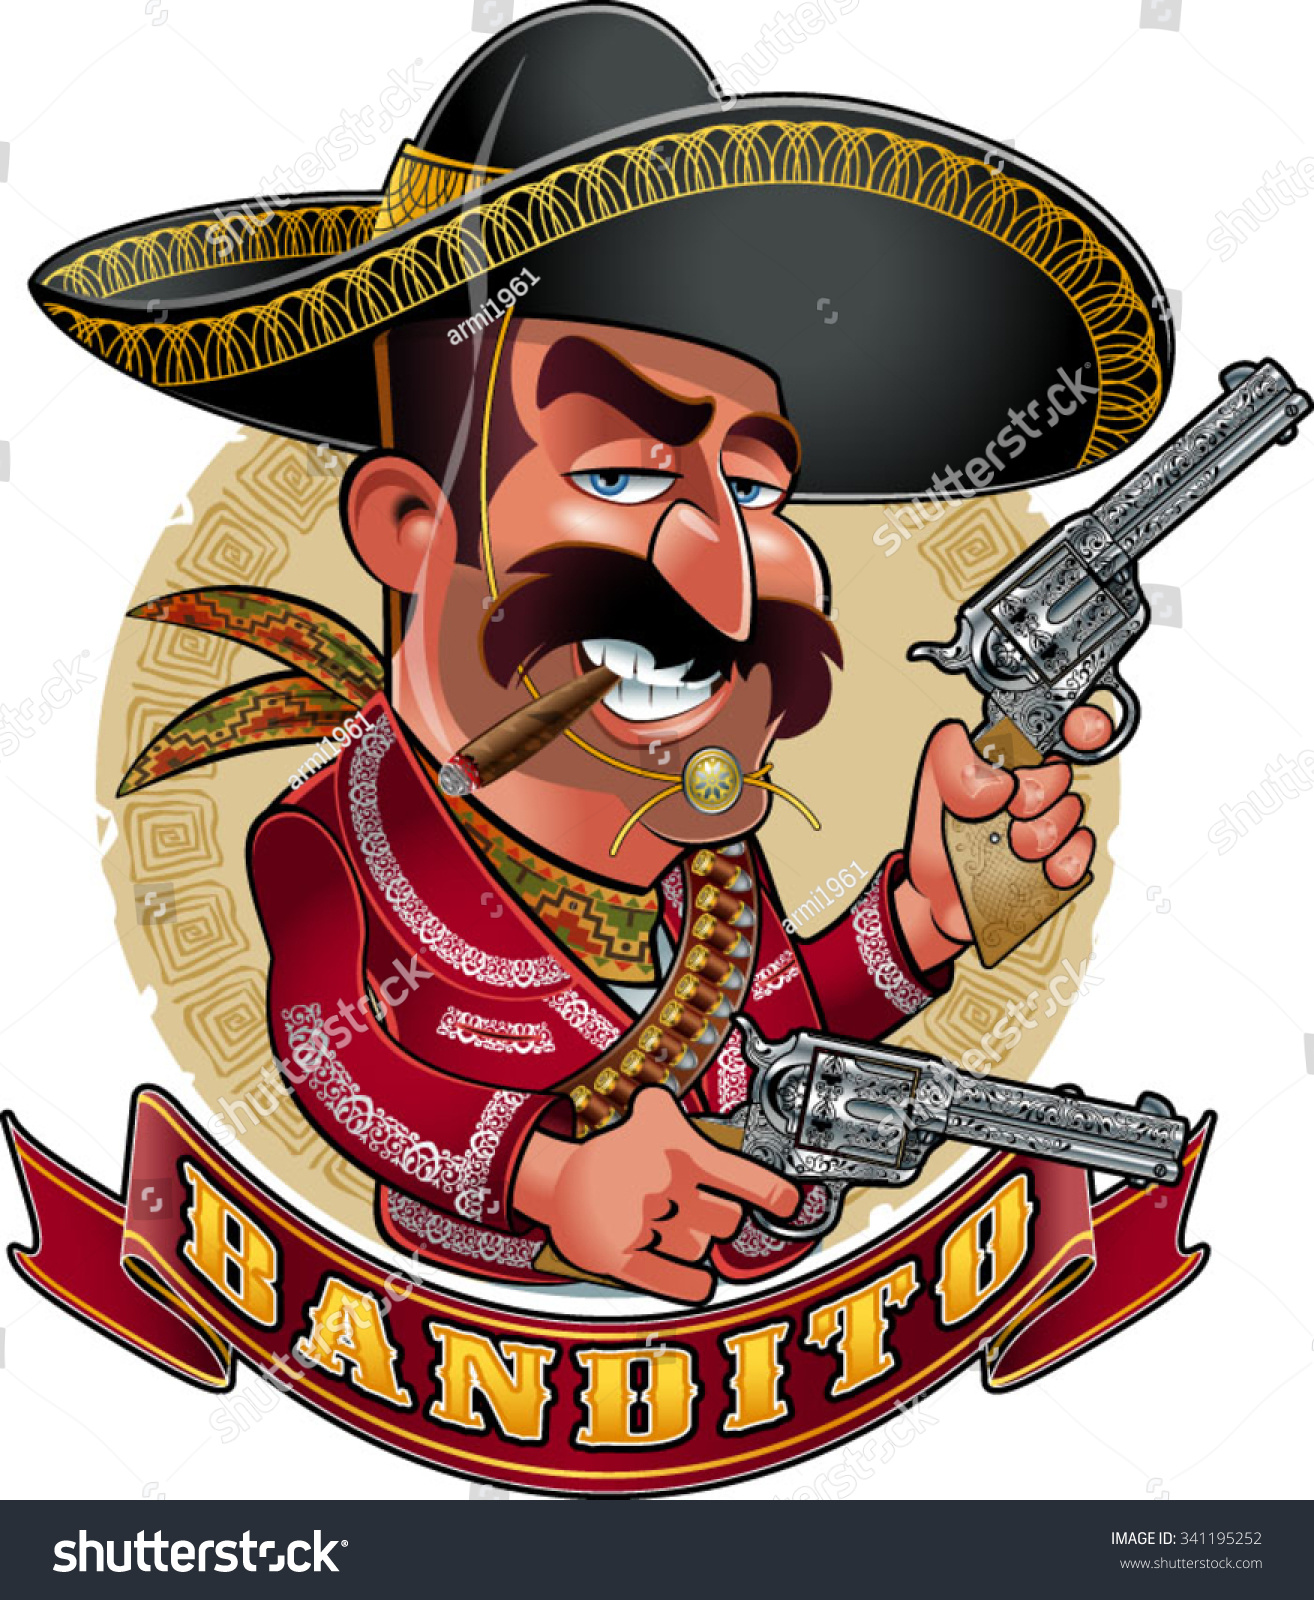 stock-vector-mexican-with-sombrero-pistols-and-banner-with-text-bandit